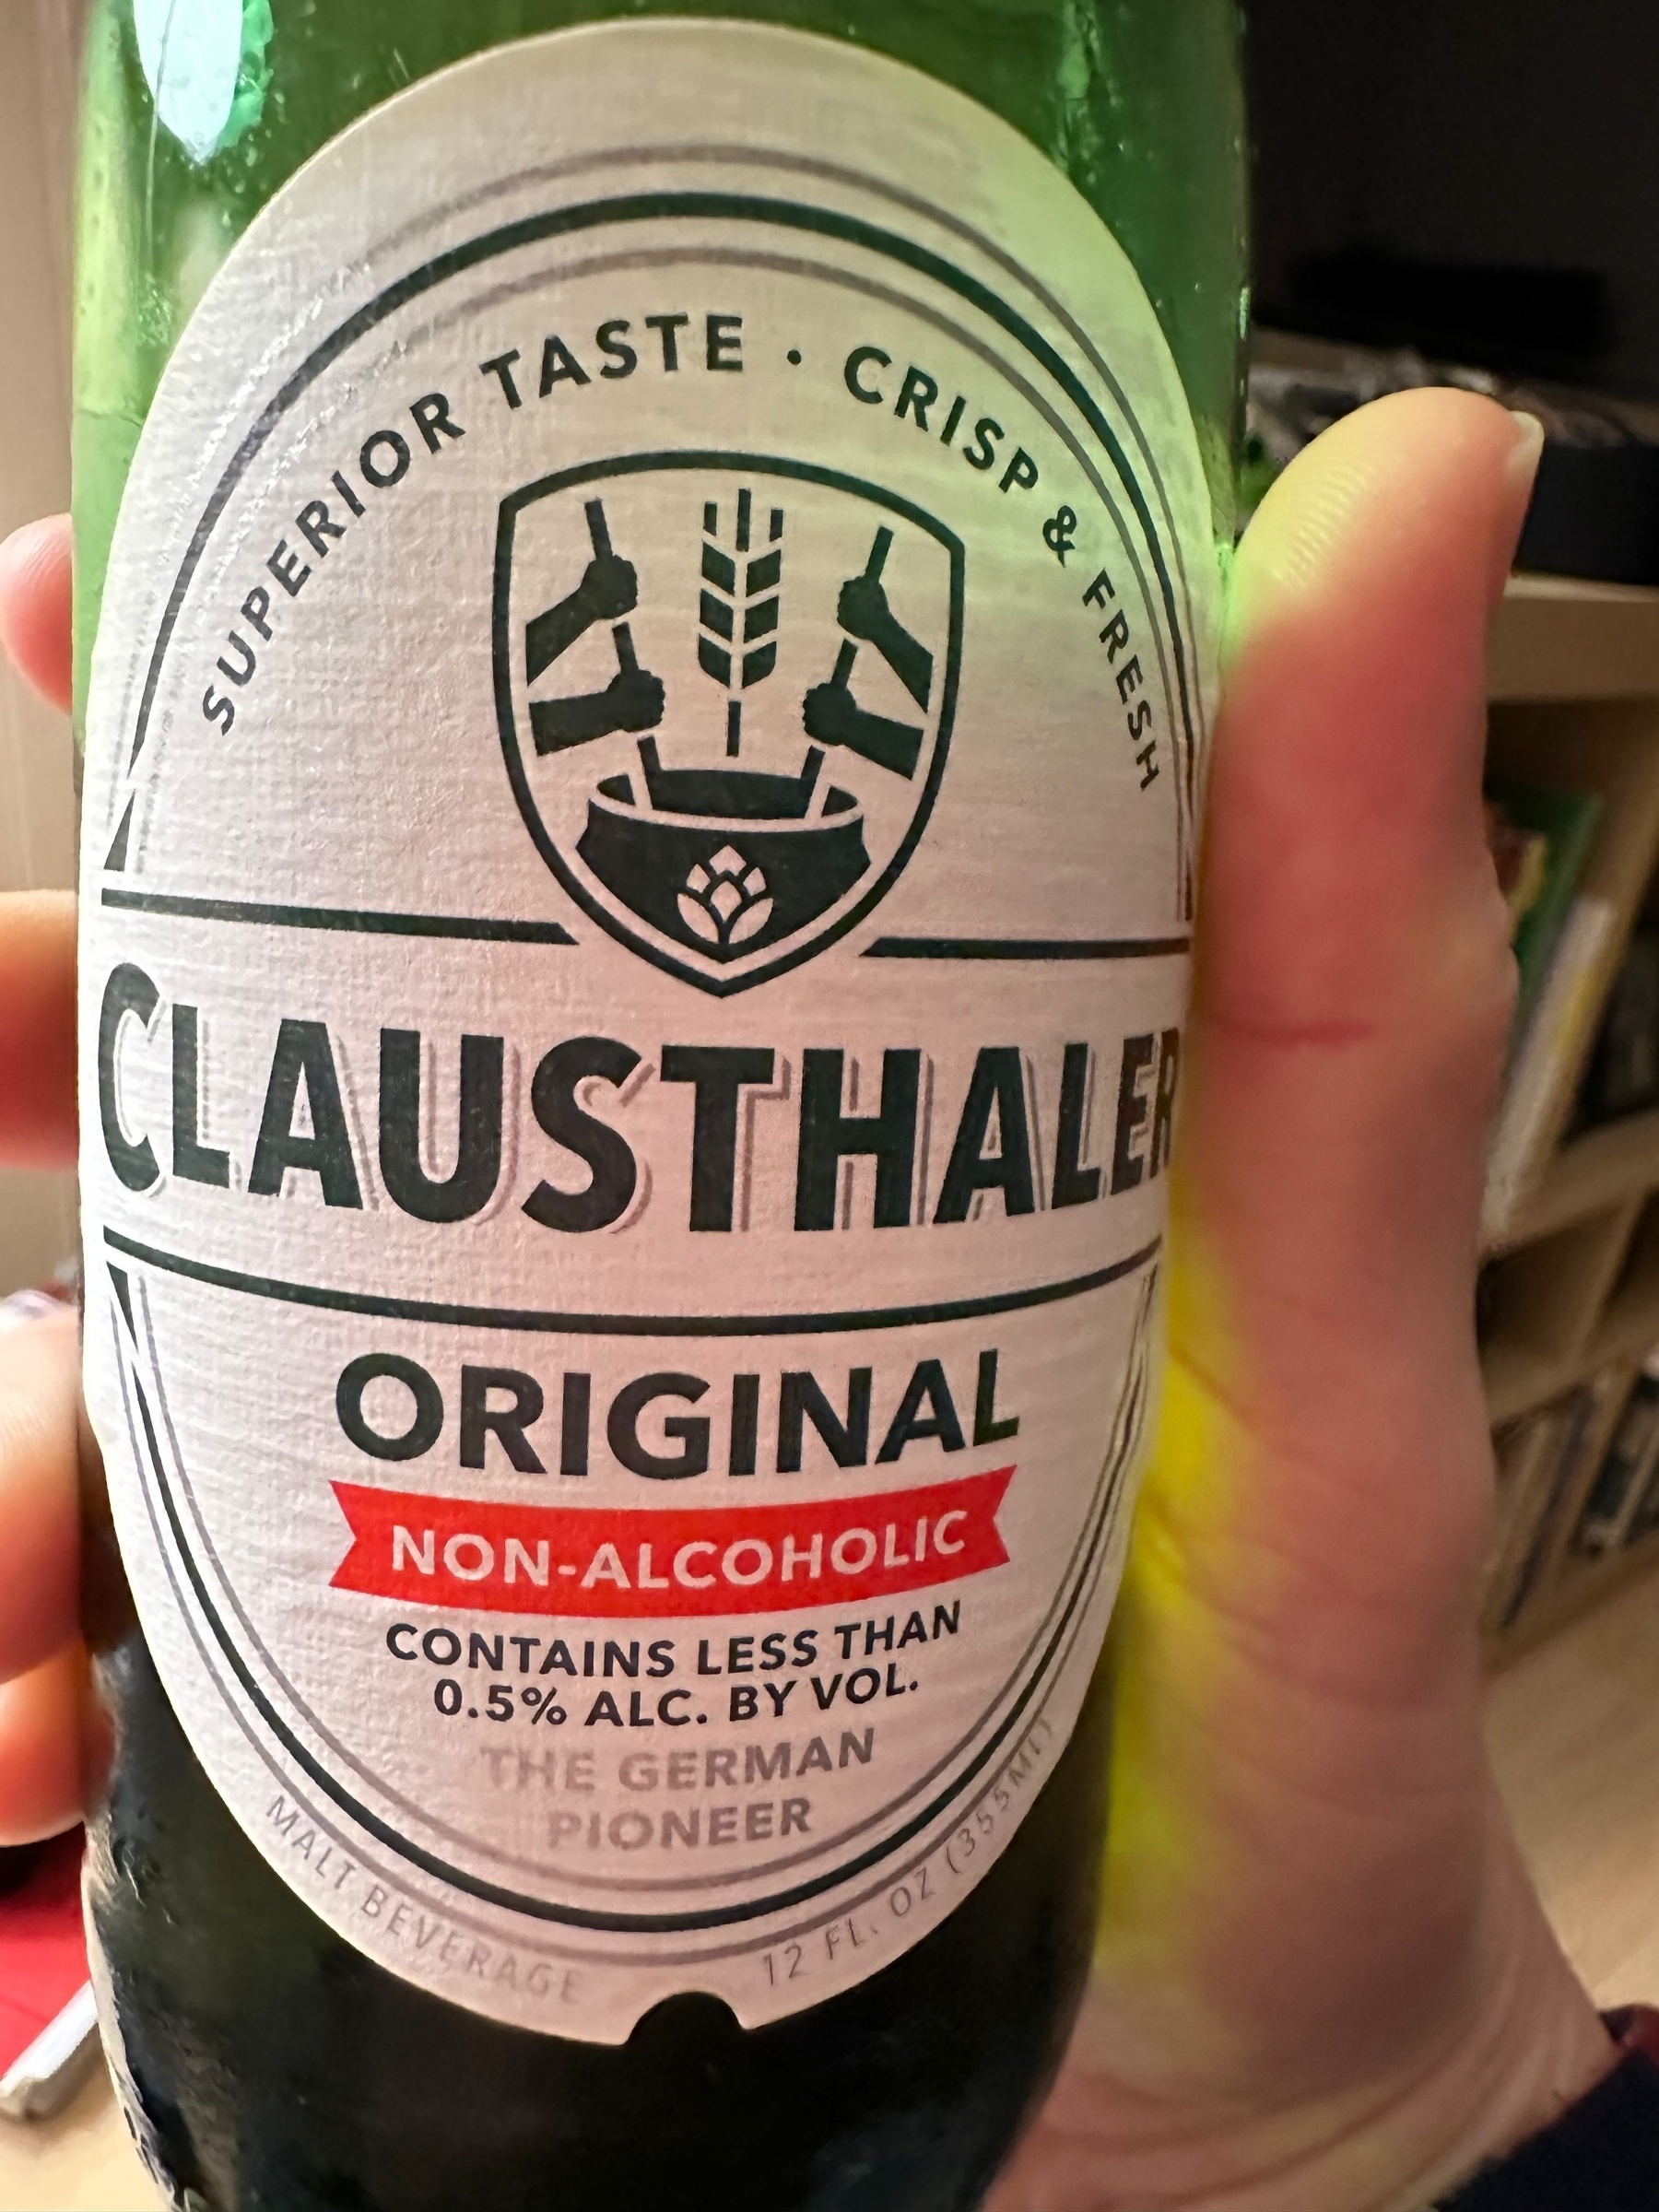 A hand holding a bottle of Clausthaler Original Non-Alcoholic beer, which contains less than 0.5% alcohol by volume. The label includes the phrases “Superior Taste,” “Crisp & Fresh,” and “The German Pioneer”